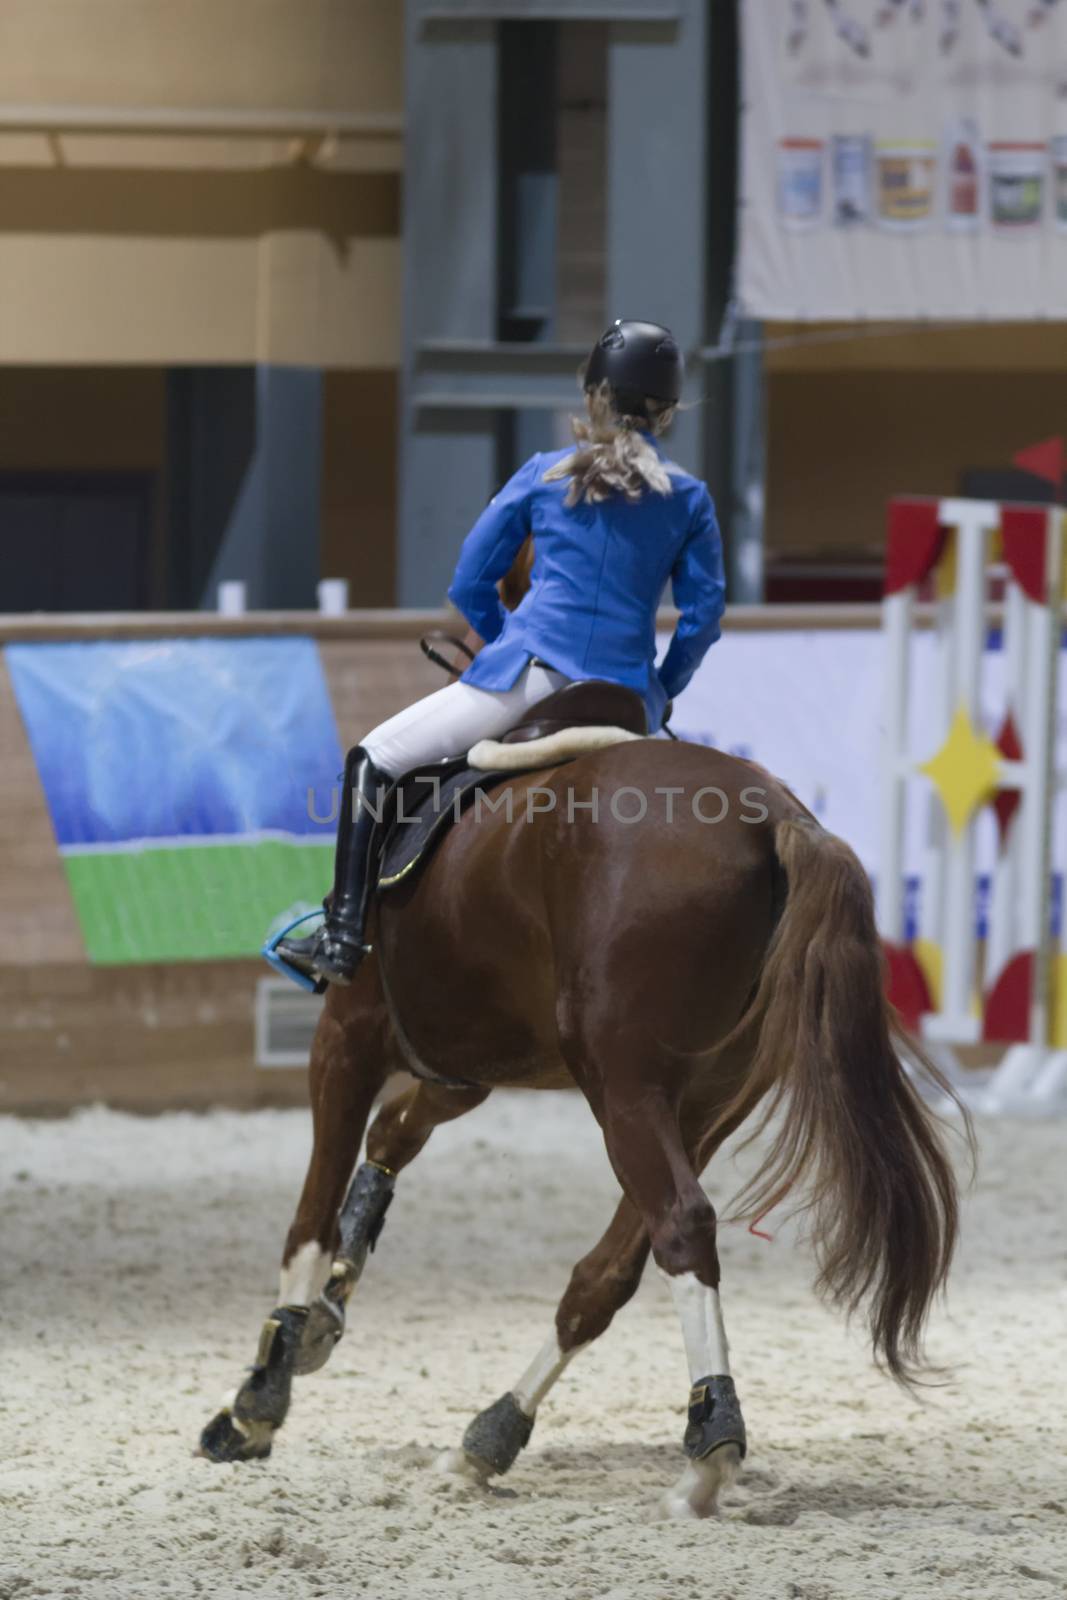 Rear view of equestrian rider running on stallion at the competition, telephoto shot